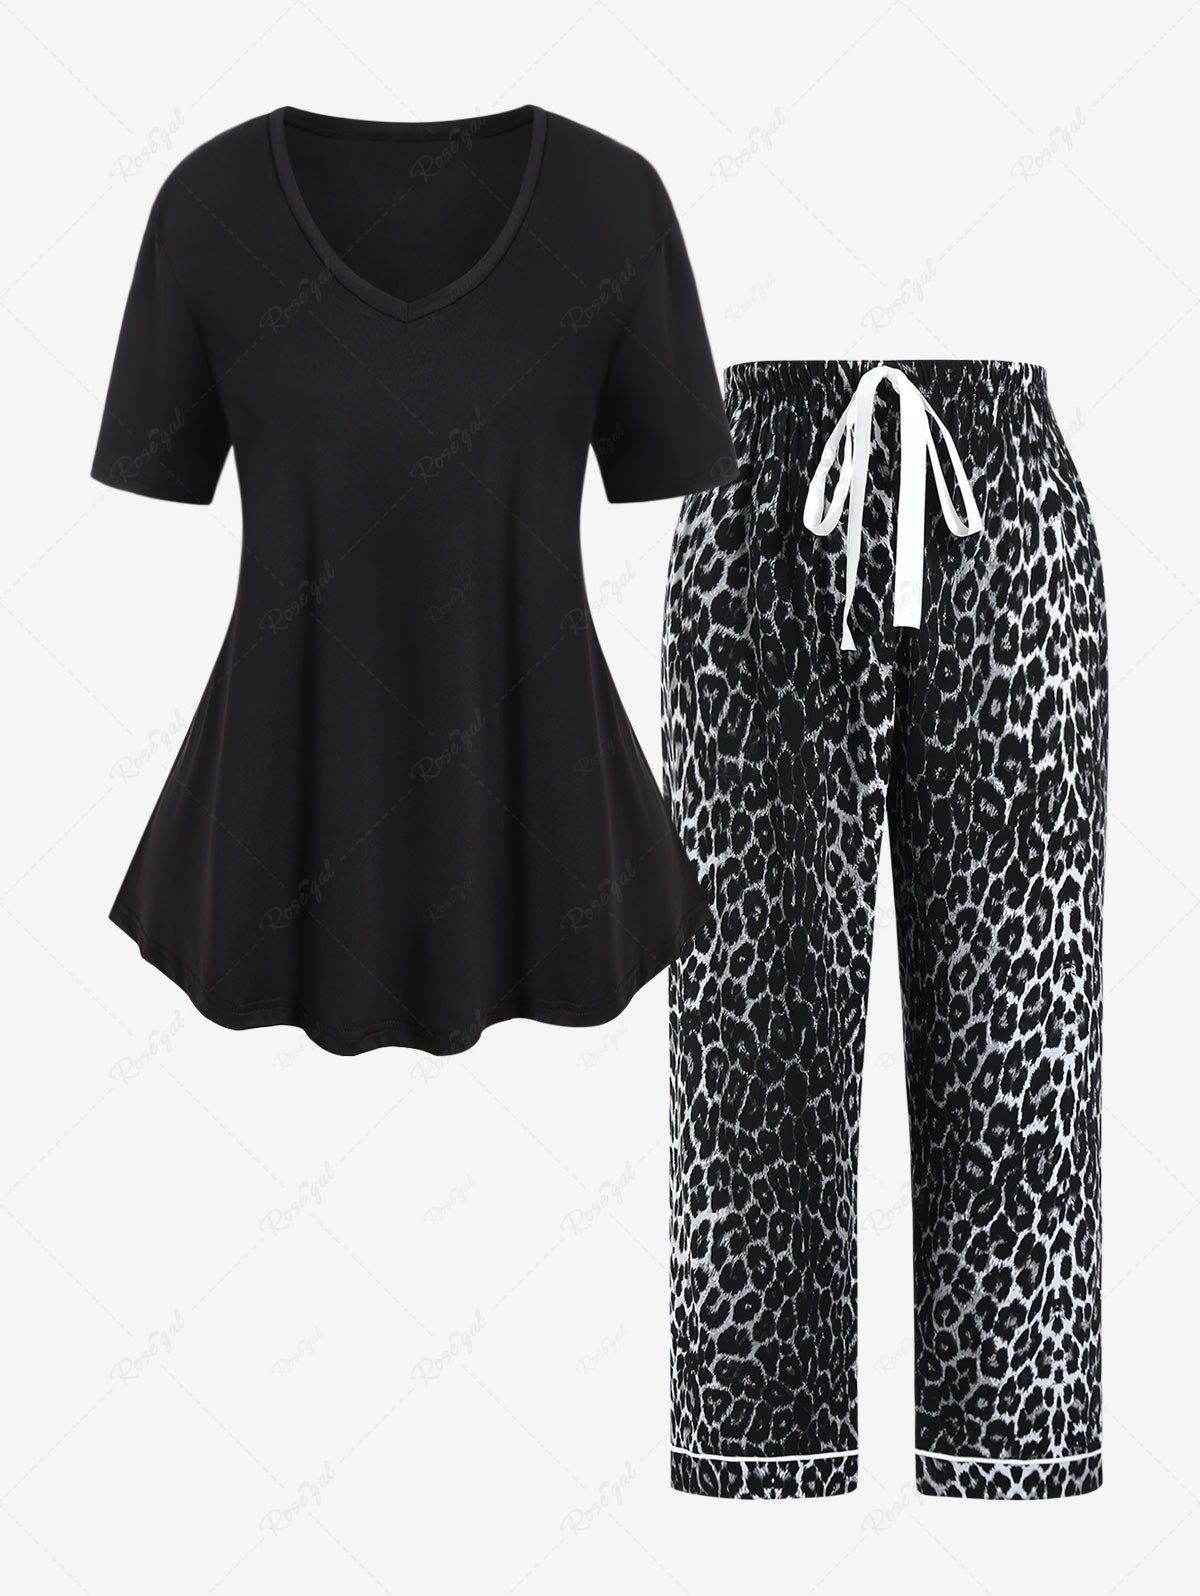 Discount Plus Size Solid V Neck Tee and Leopard Print Pants Pajamas Set  